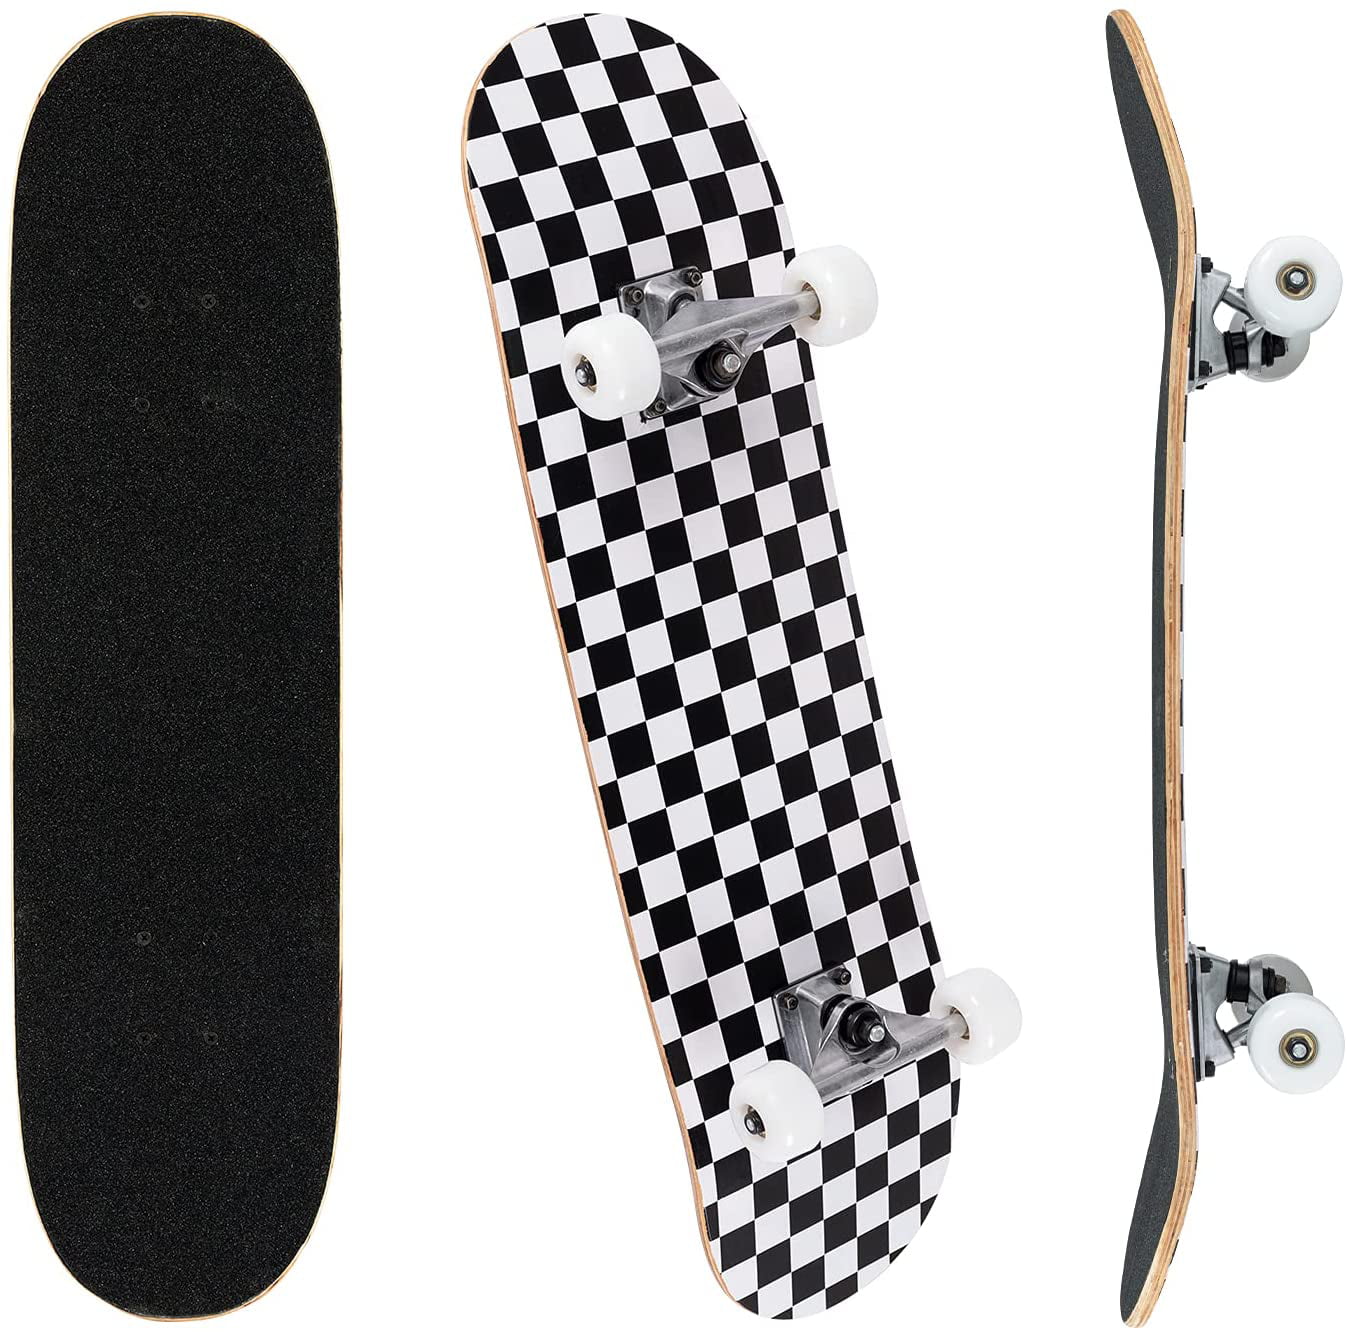 Umineux Complete Skateboard Made of Maple, Checker, 31 In. x 8 In